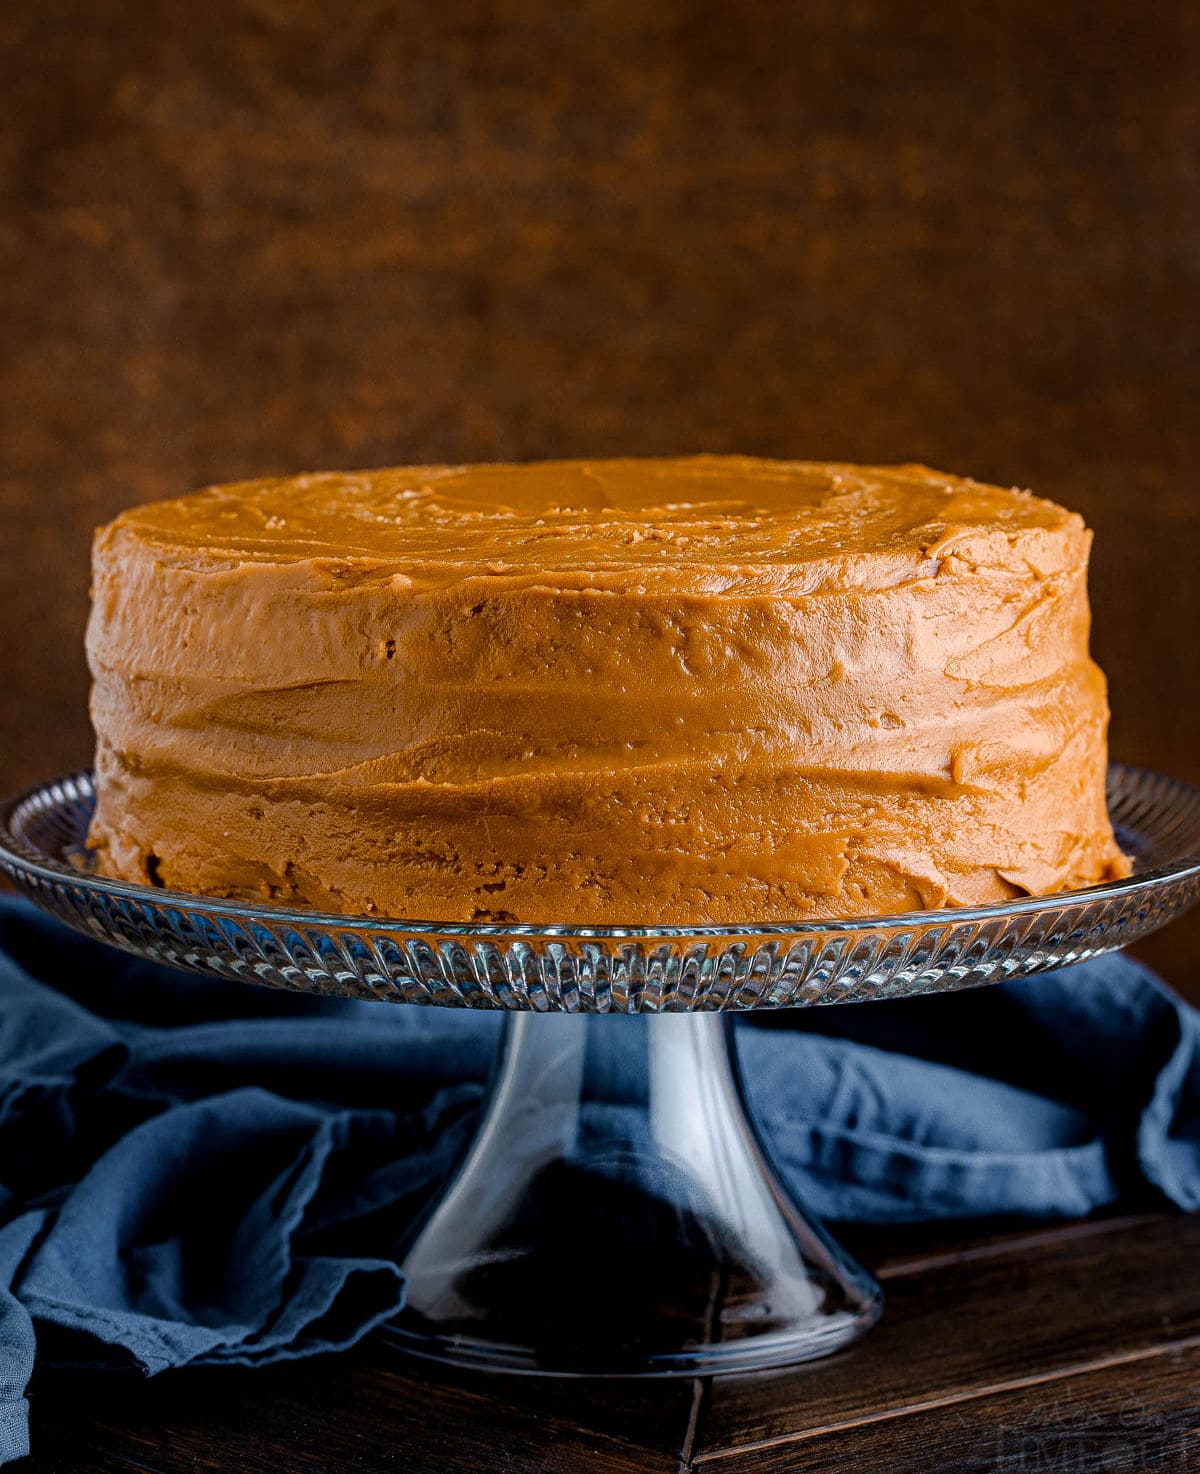 two layer cake with caramel frosting sitting on glass cake stand with a navy blue napkin in the backround.